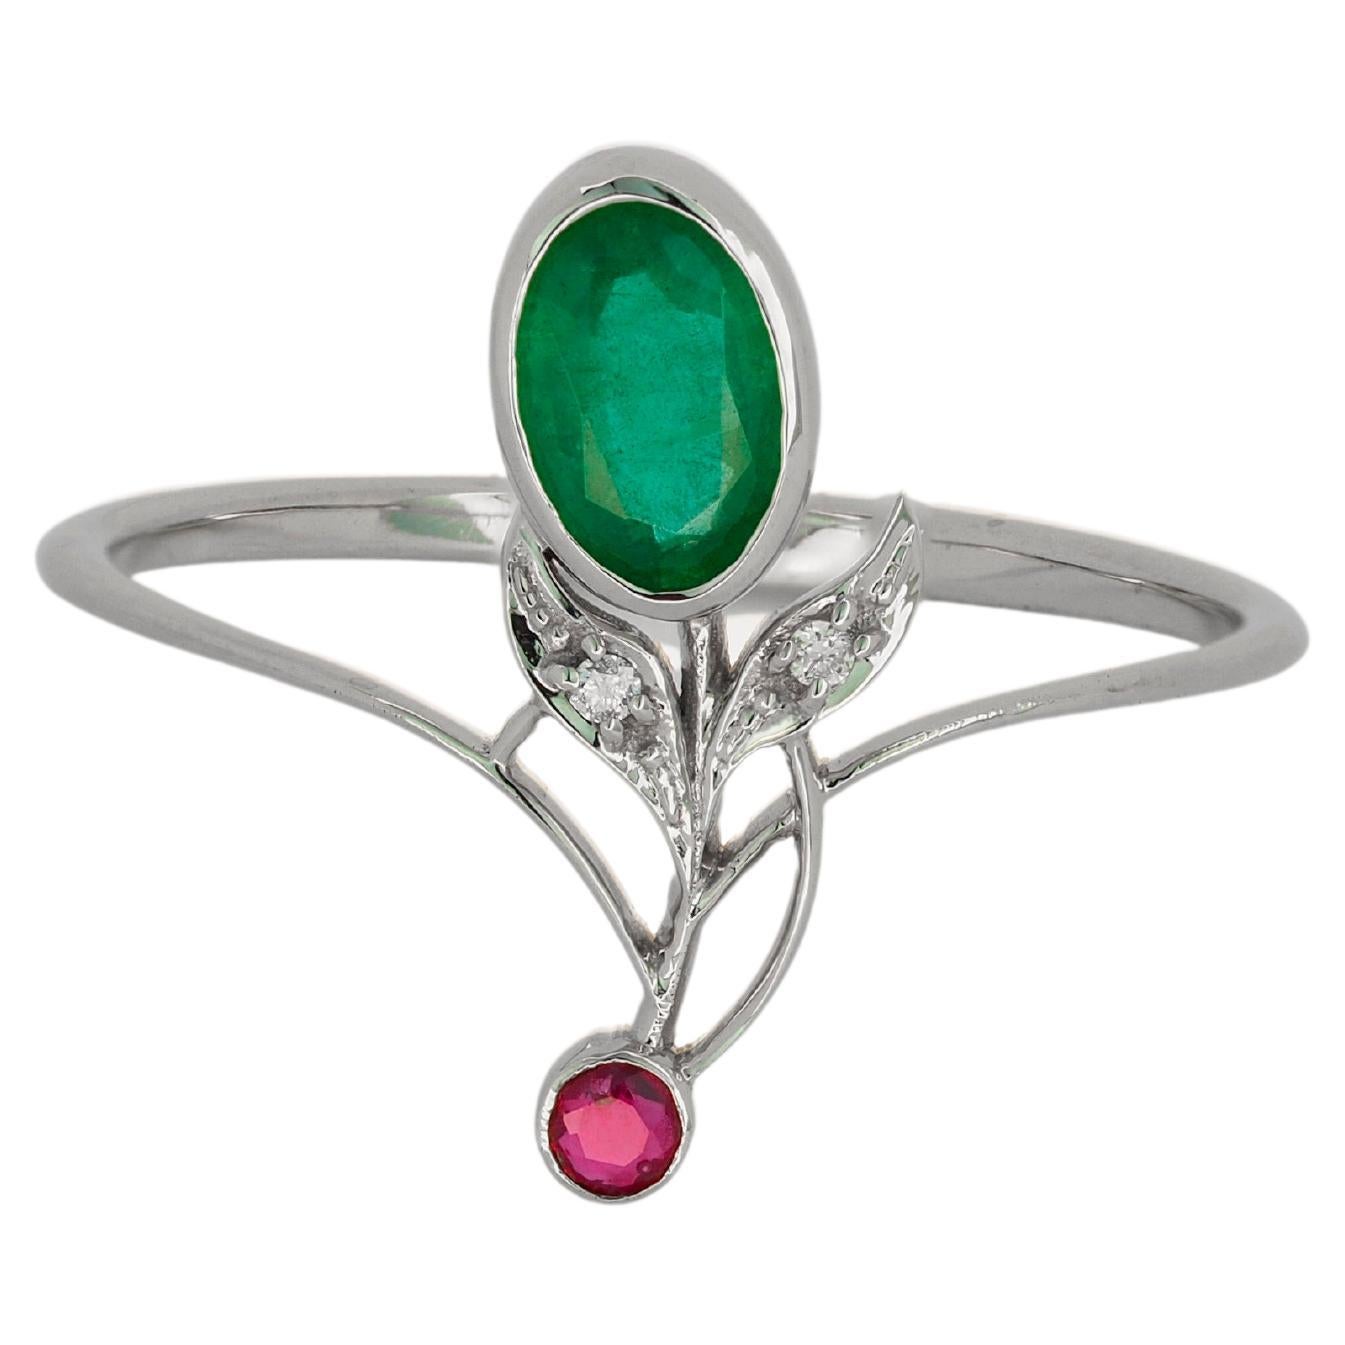 For Sale:  14 Karat Gold Ring with Emerald, Ruby and Diamonds